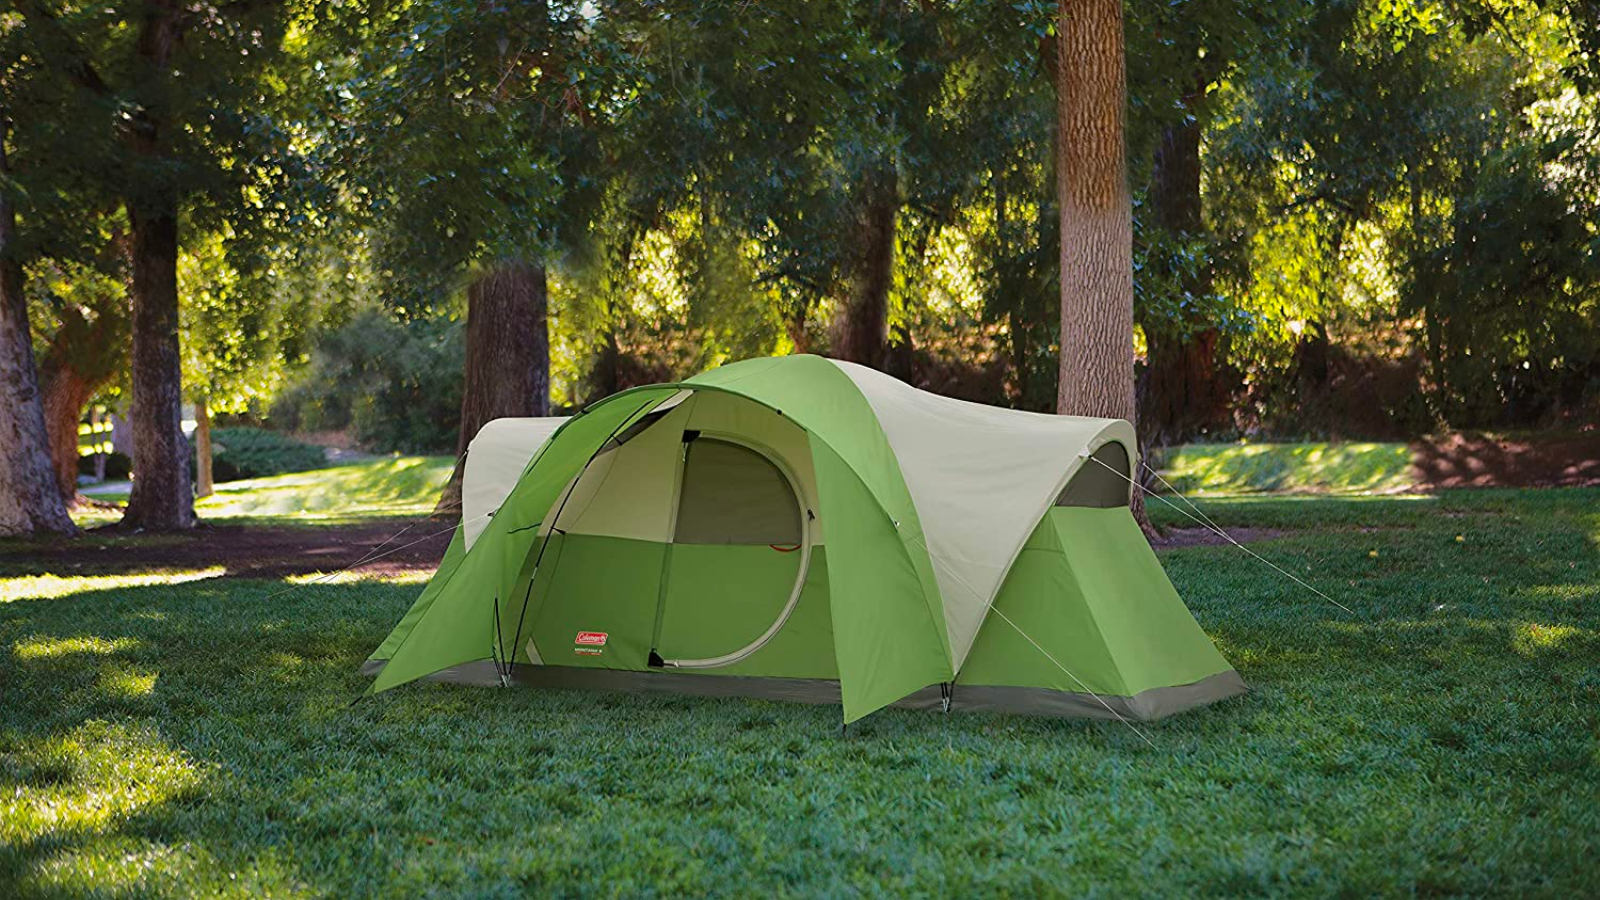 a green coleman montana 8-person tent set up on a grassy lawn in front of tall trees